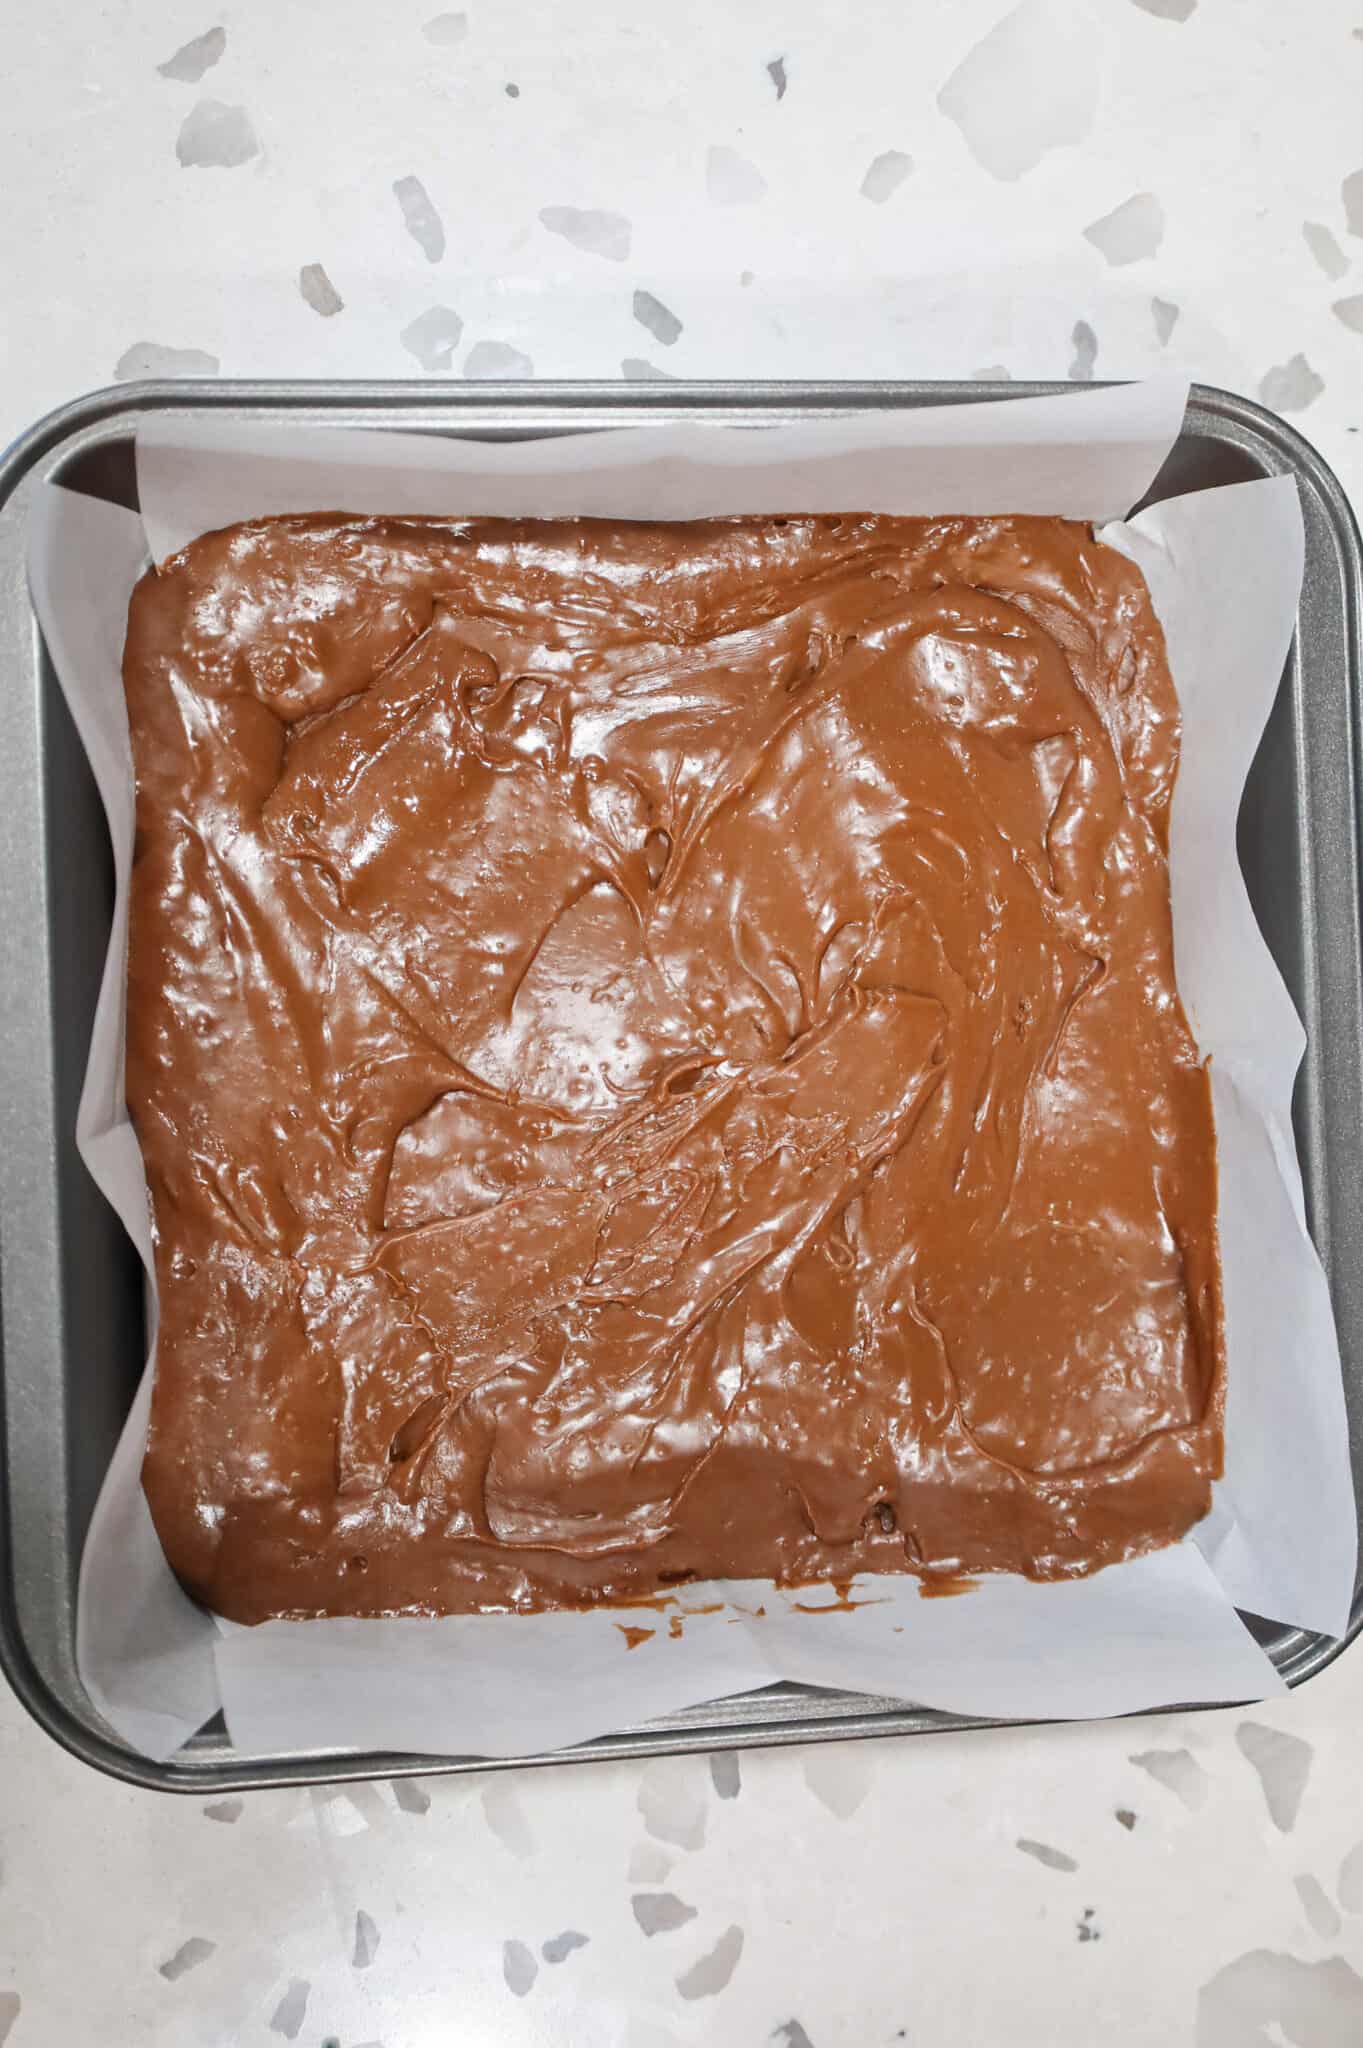 milk chocolate fudge mixture in a parchment lined baking pan